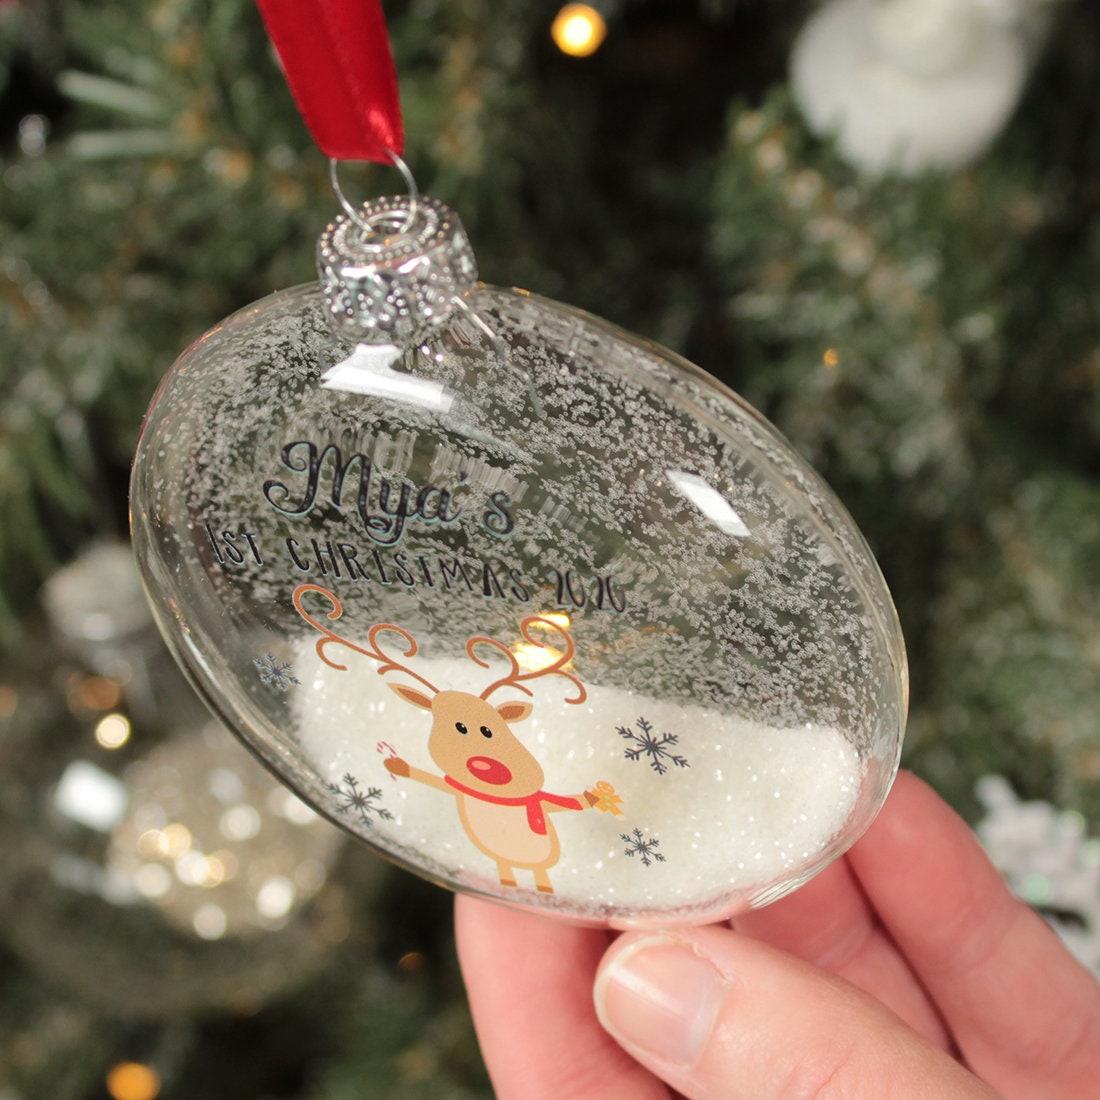 Personalised Rudolph Baby's 1st Christmas Glitter Glass - Etsy 日本